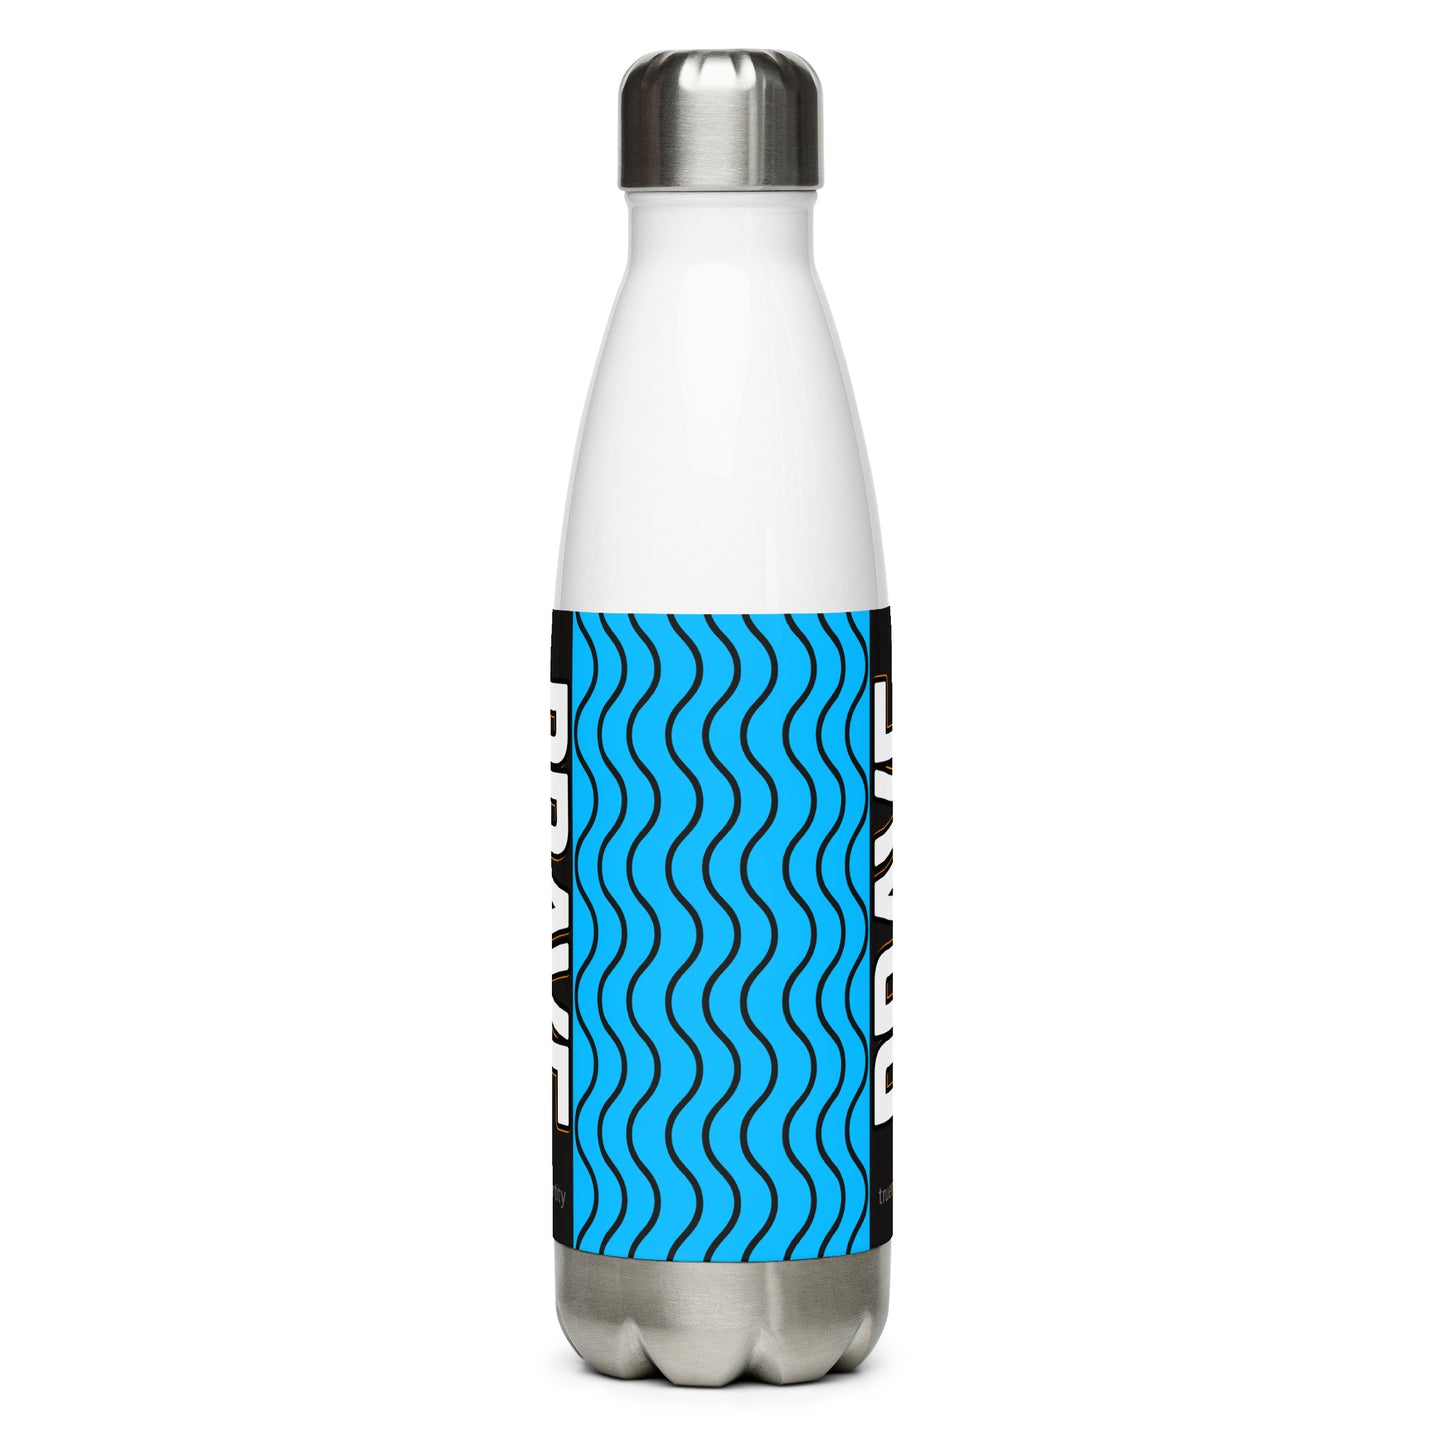 BRAVE Stainless Steel Water Bottle Blue Wave Design, 17 oz, in Black or White